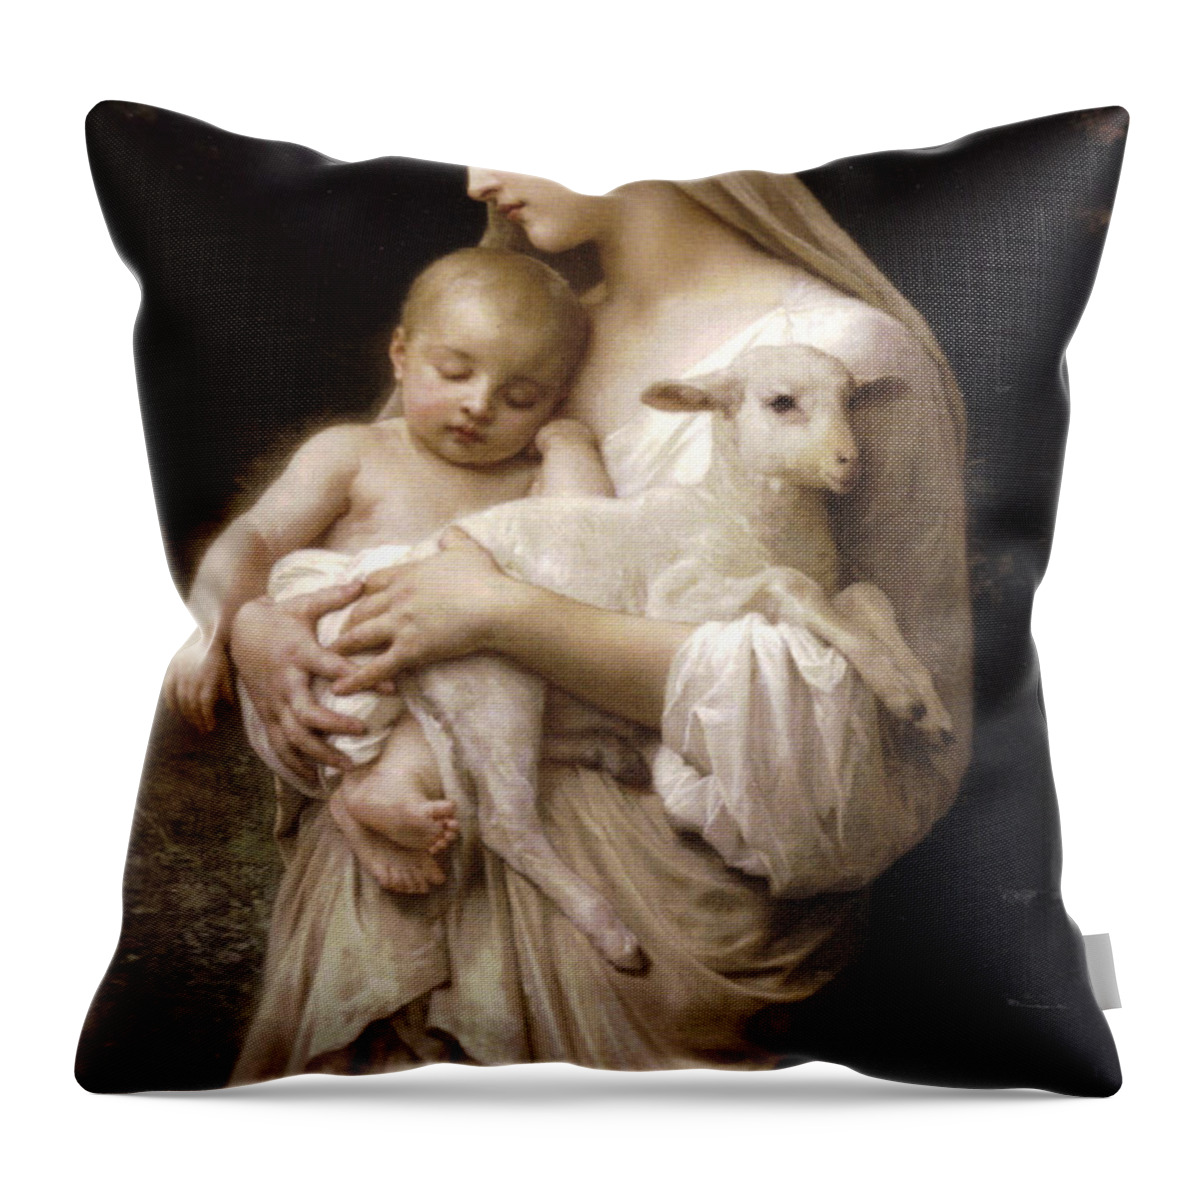 Nativity Throw Pillow featuring the painting Madonna and Child by William Bouguereau